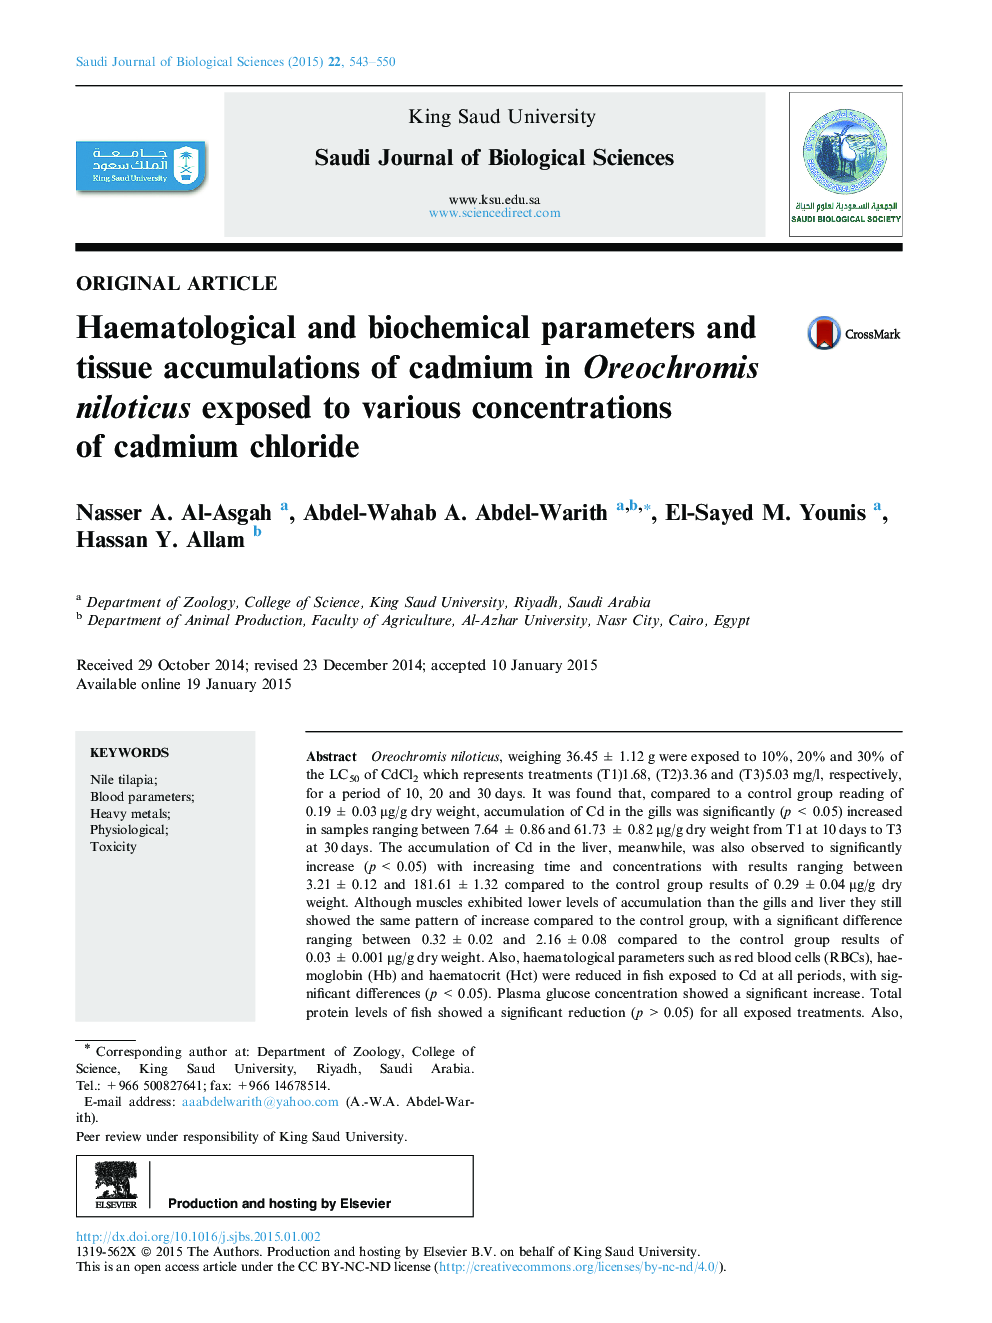 Haematological and biochemical parameters and tissue accumulations of cadmium in Oreochromis niloticus exposed to various concentrations of cadmium chloride 